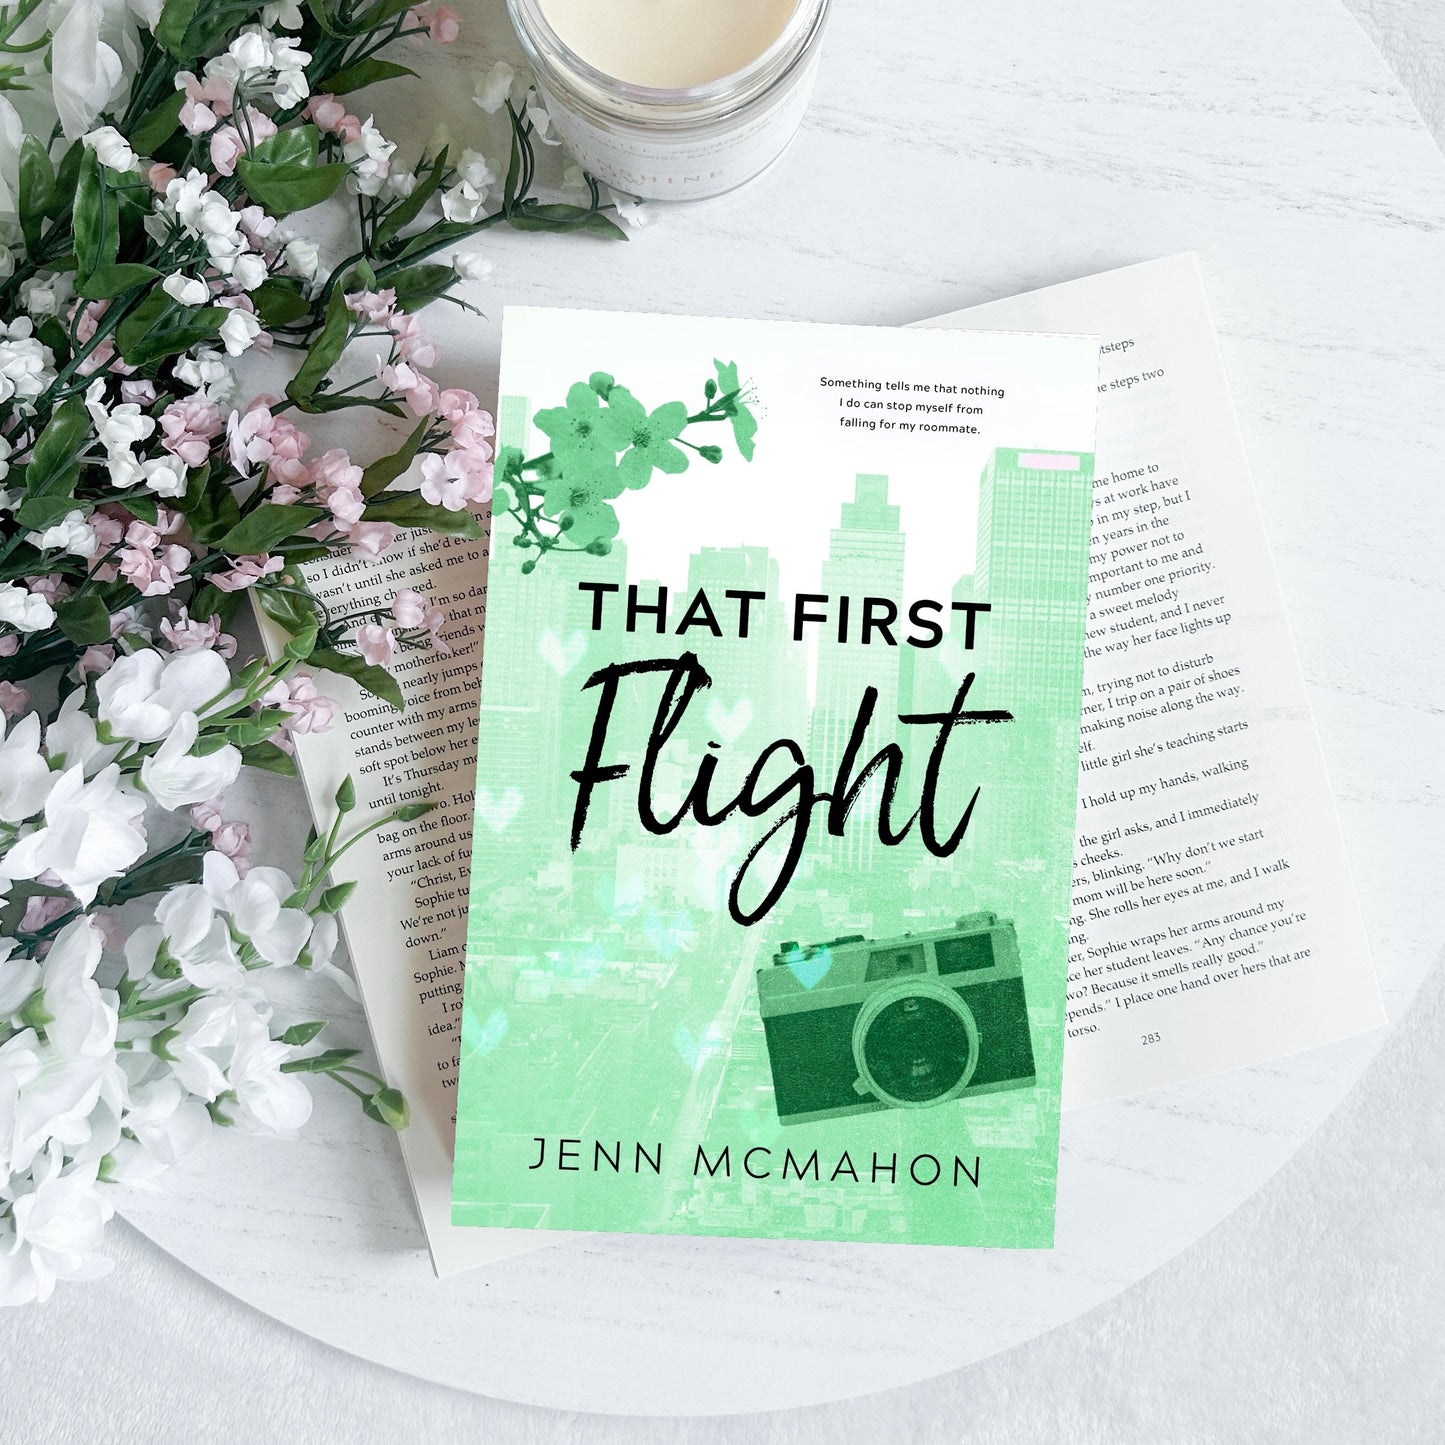 PREORDER: Signed Copy of That First Flight